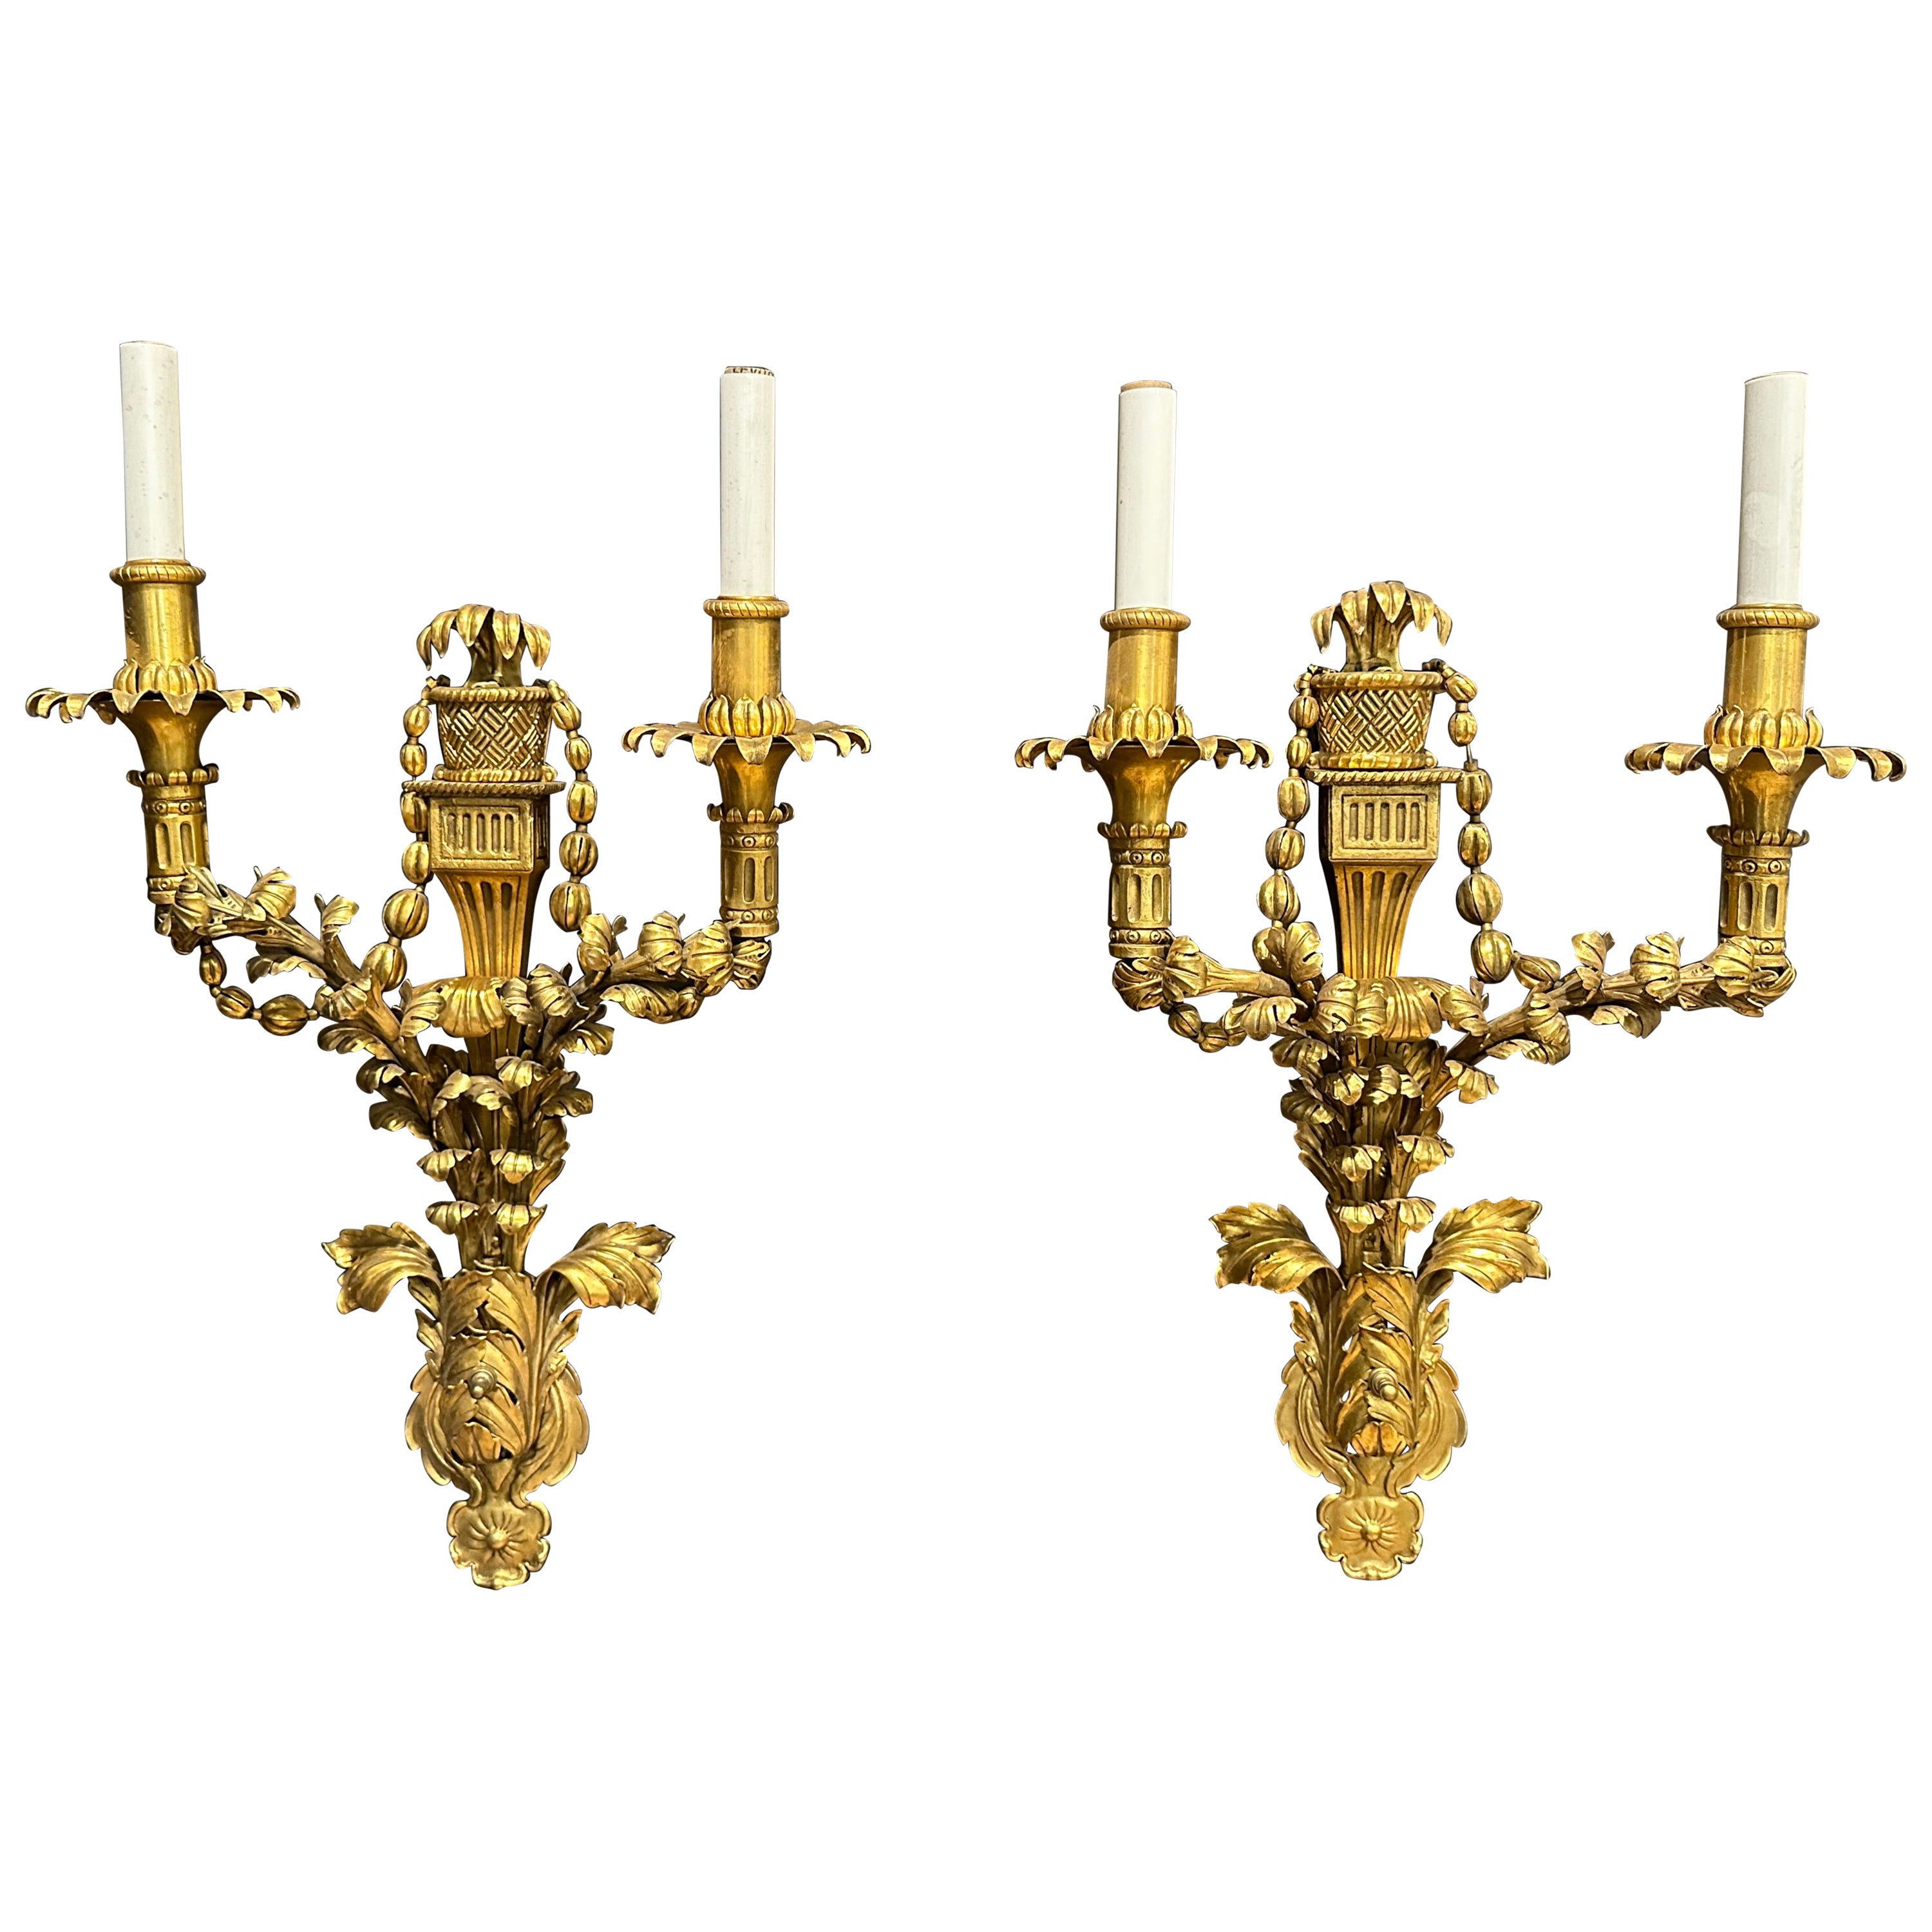 Pair Of Caldwell Gilt Bronze Wall Sconces